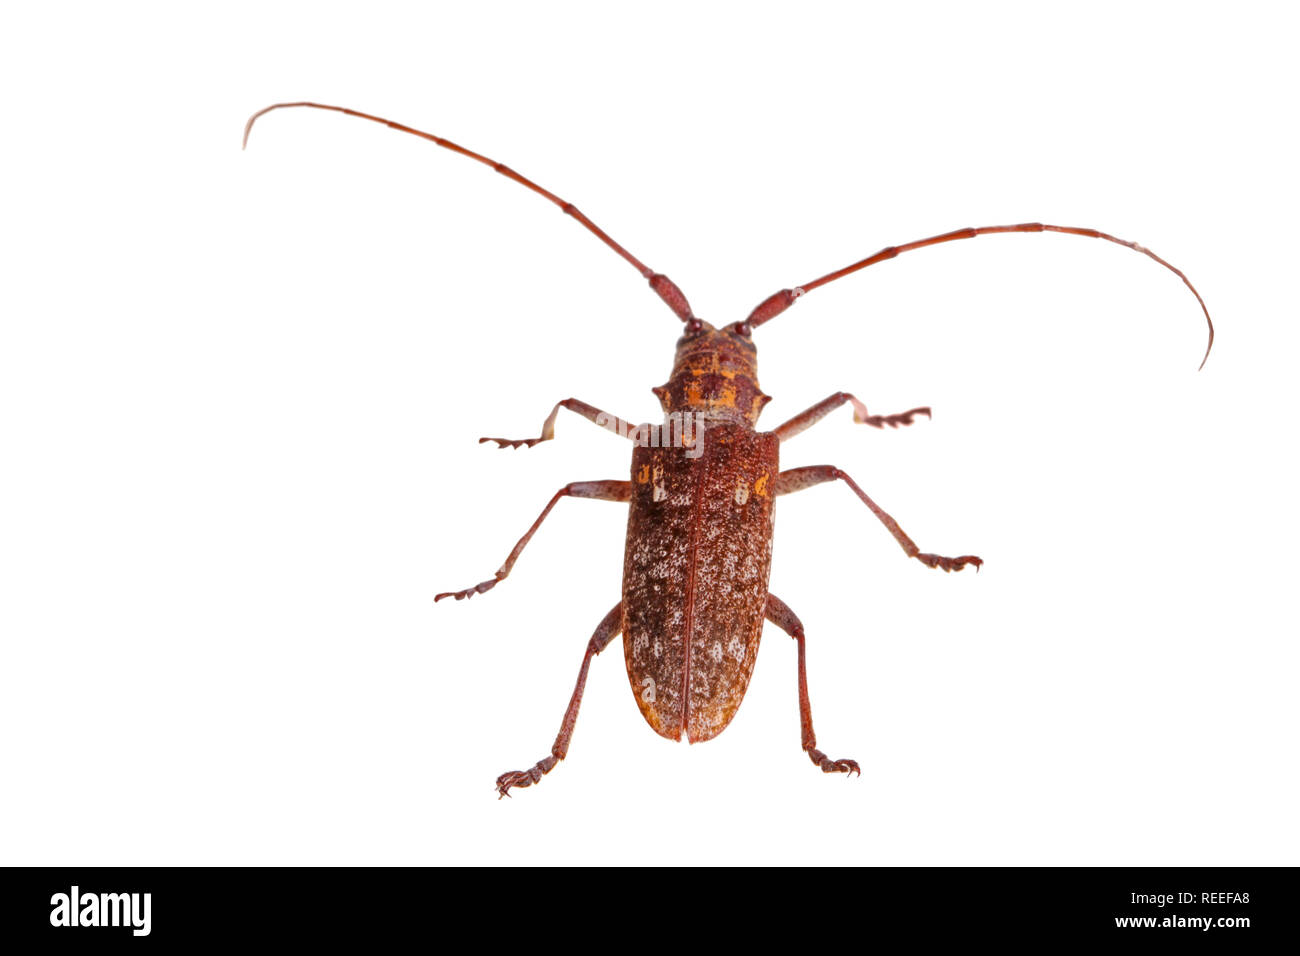 Adult of the Carolina pine sawyer, Monochamus carolinensis, a species of longhorn beetle in the Family Cerambycidae, isolated against a white backgrou Stock Photo